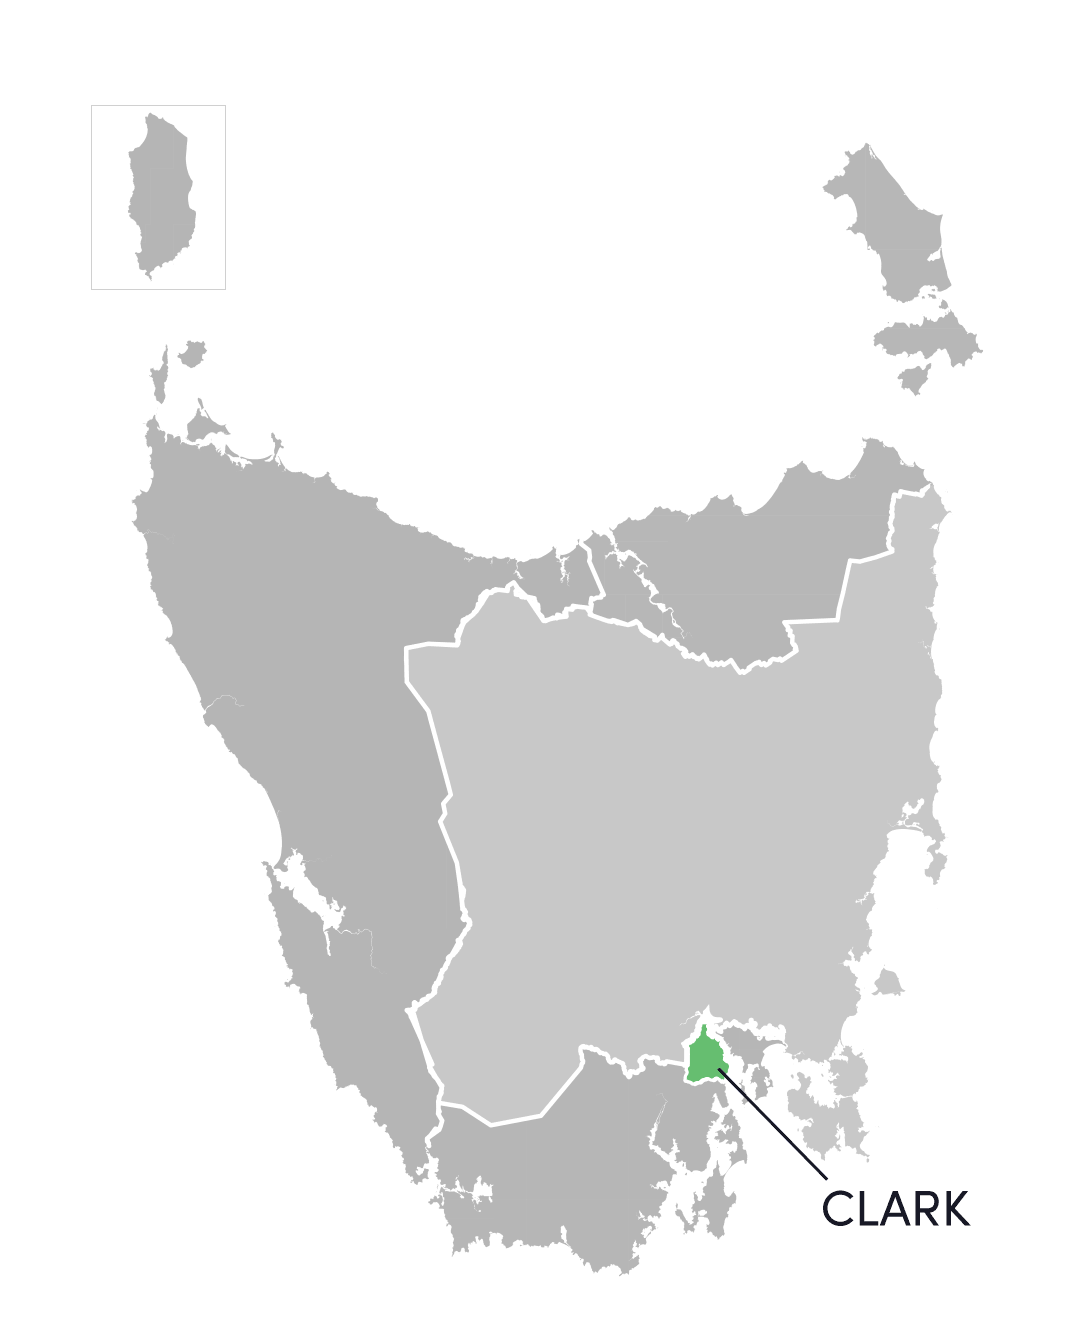 Clark division highlighted on illustrated map of Tasmania